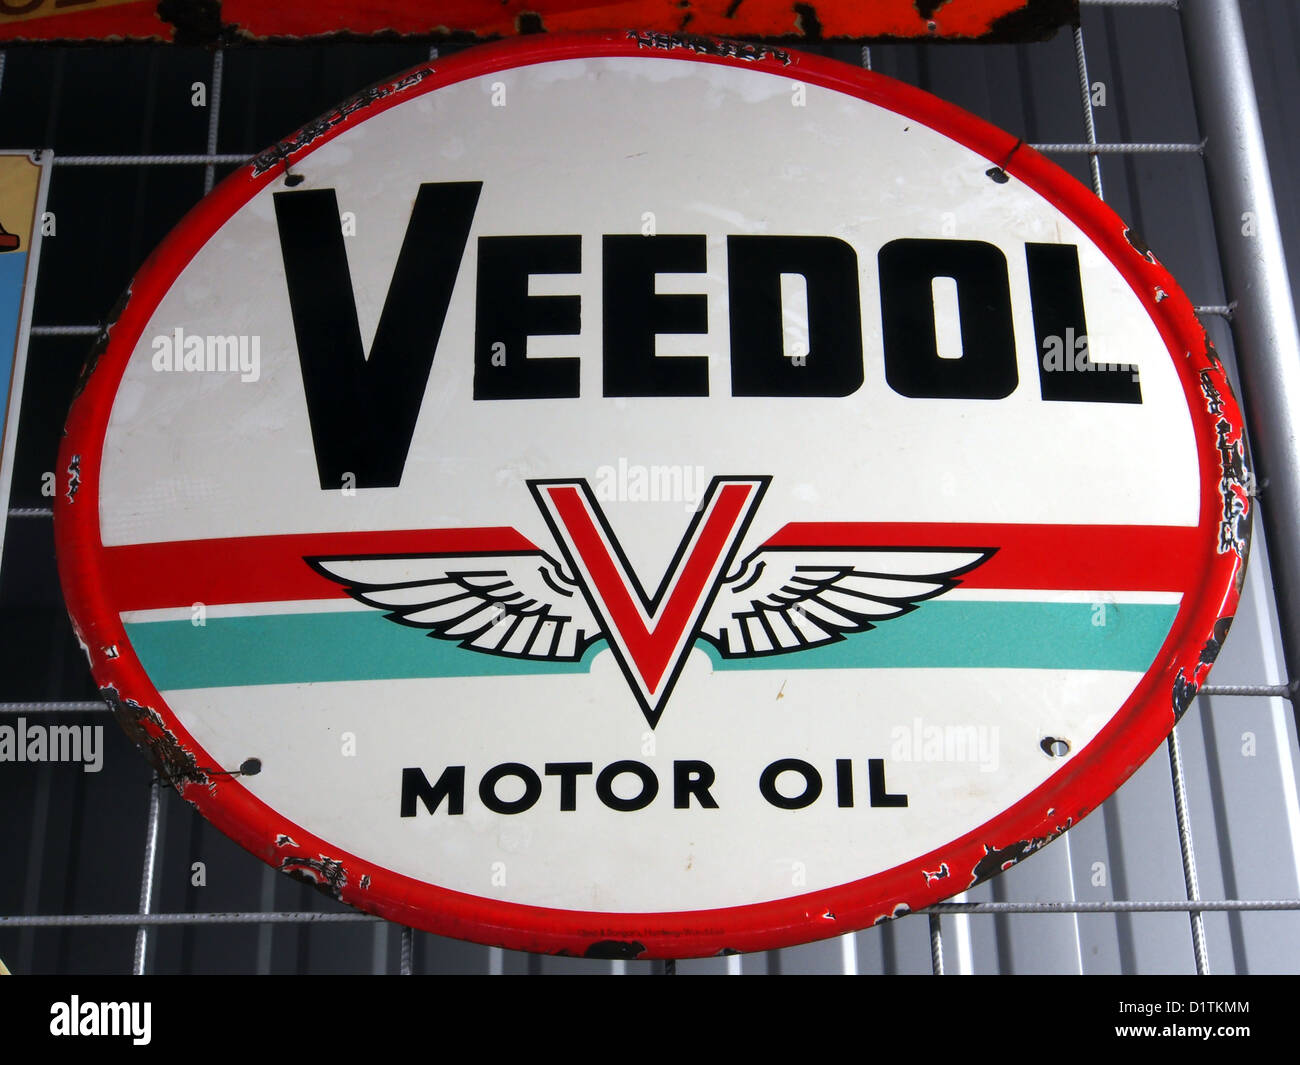 VALVOLINE MOTOR OIL SOLD HERE ENAMELLED METAL AND WOOD THERMOMETER.GARAGE,OIL. 